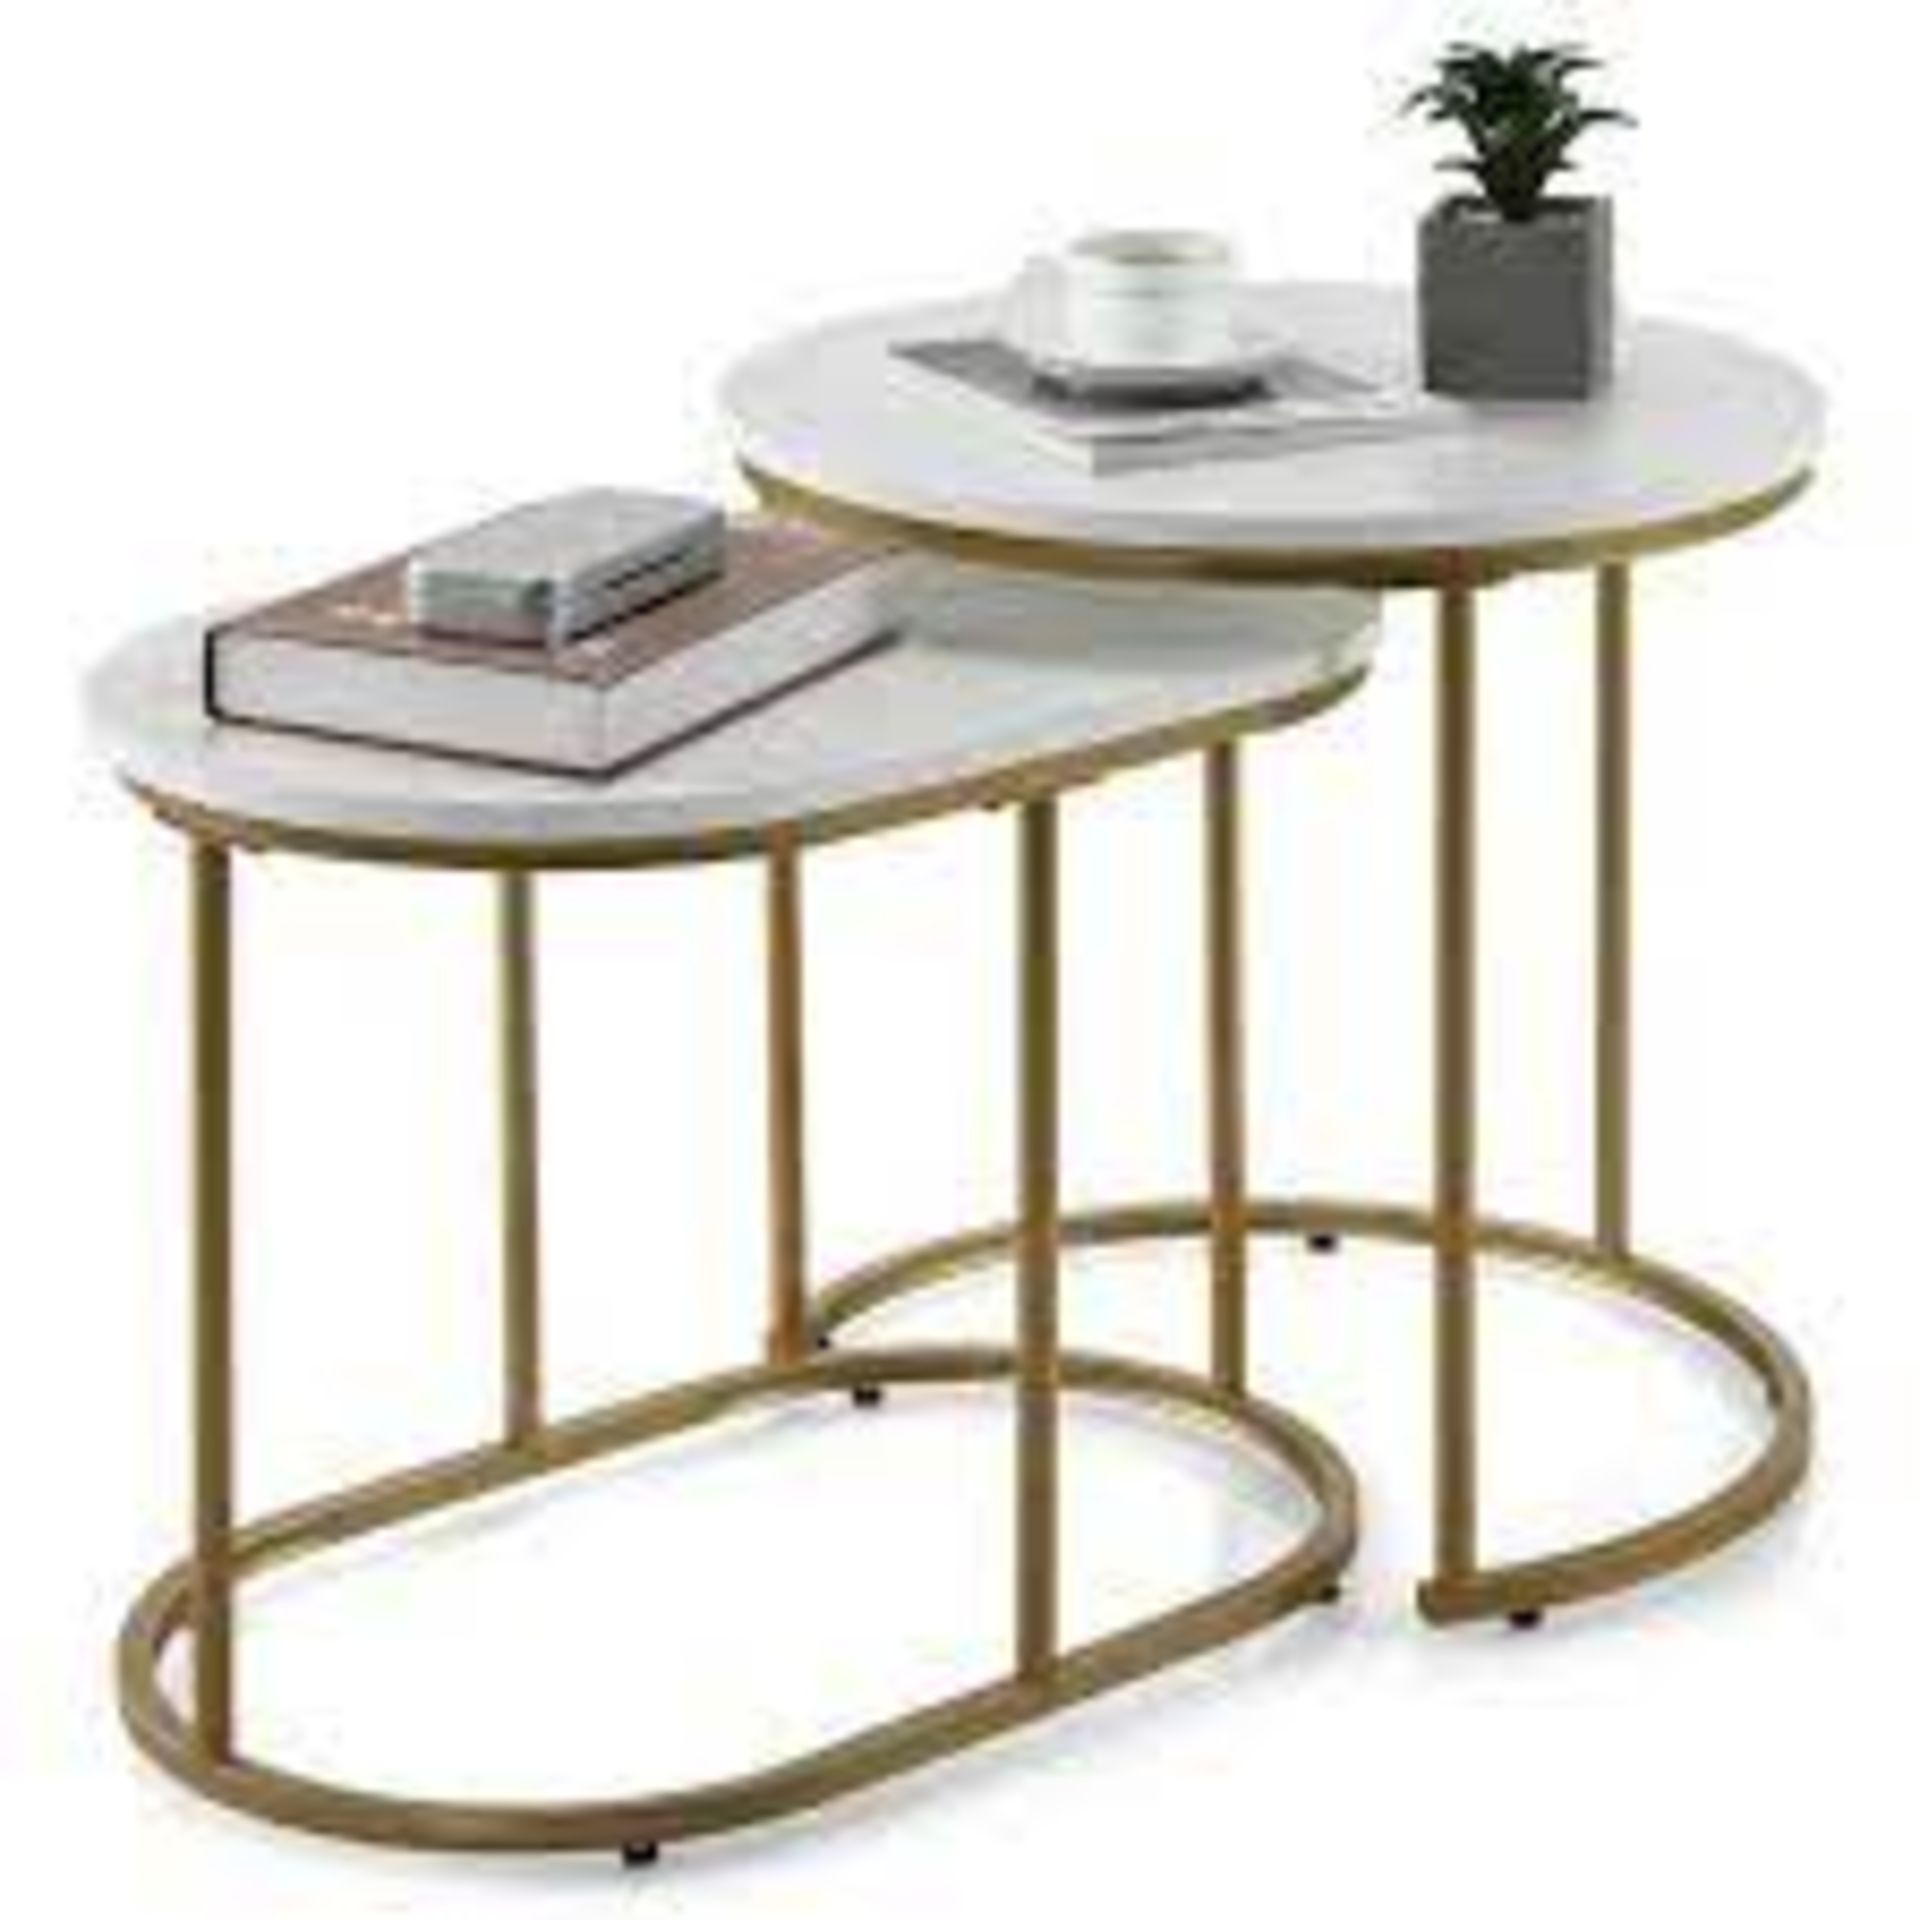 Nesting Coffee Table Modern Set Of 2 Marble Coffee Side Table Set Living Room - ER53